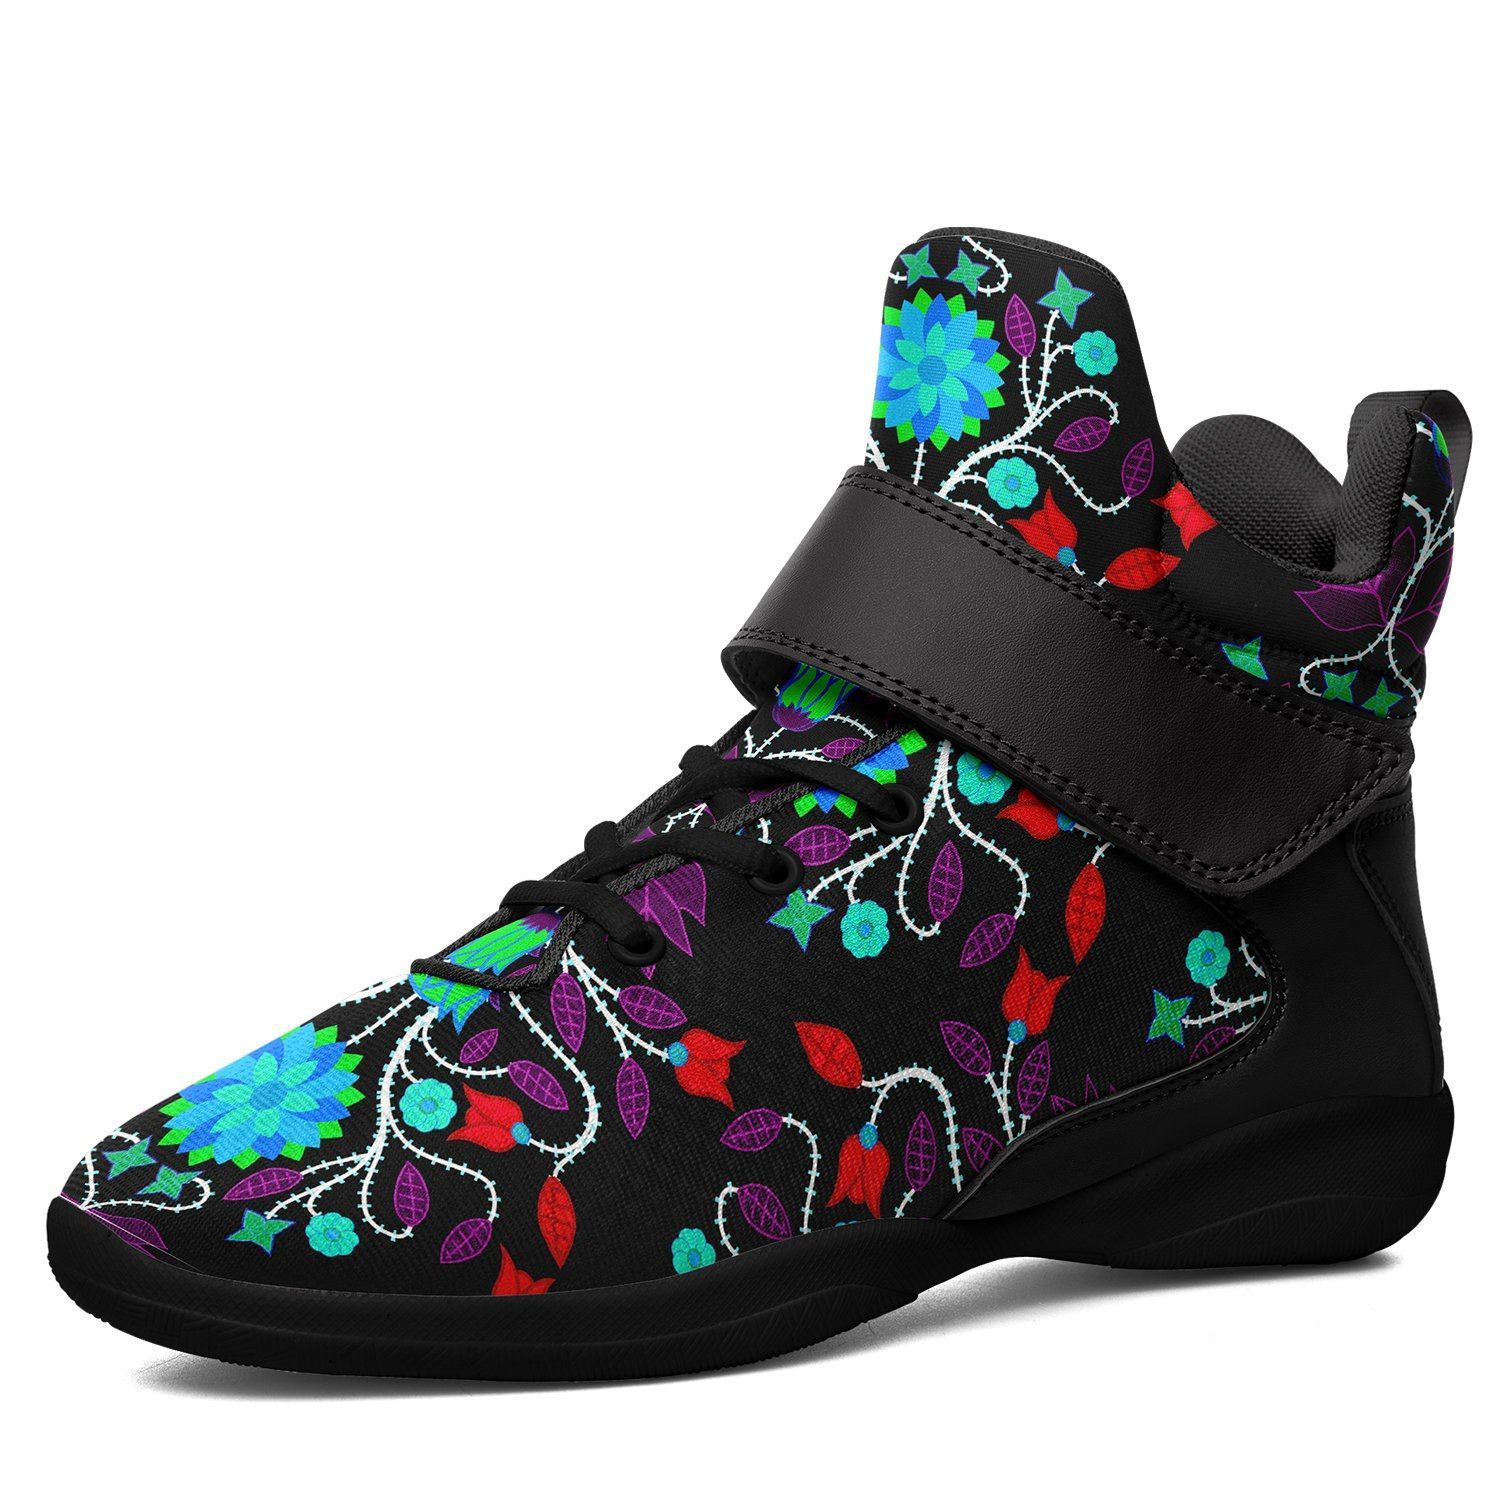 Floral Beadwork Four Clans Winter Kid's Ipottaa Basketball / Sport High Top Shoes 49 Dzine US Child 12.5 / EUR 30 Black Sole with Black Strap 